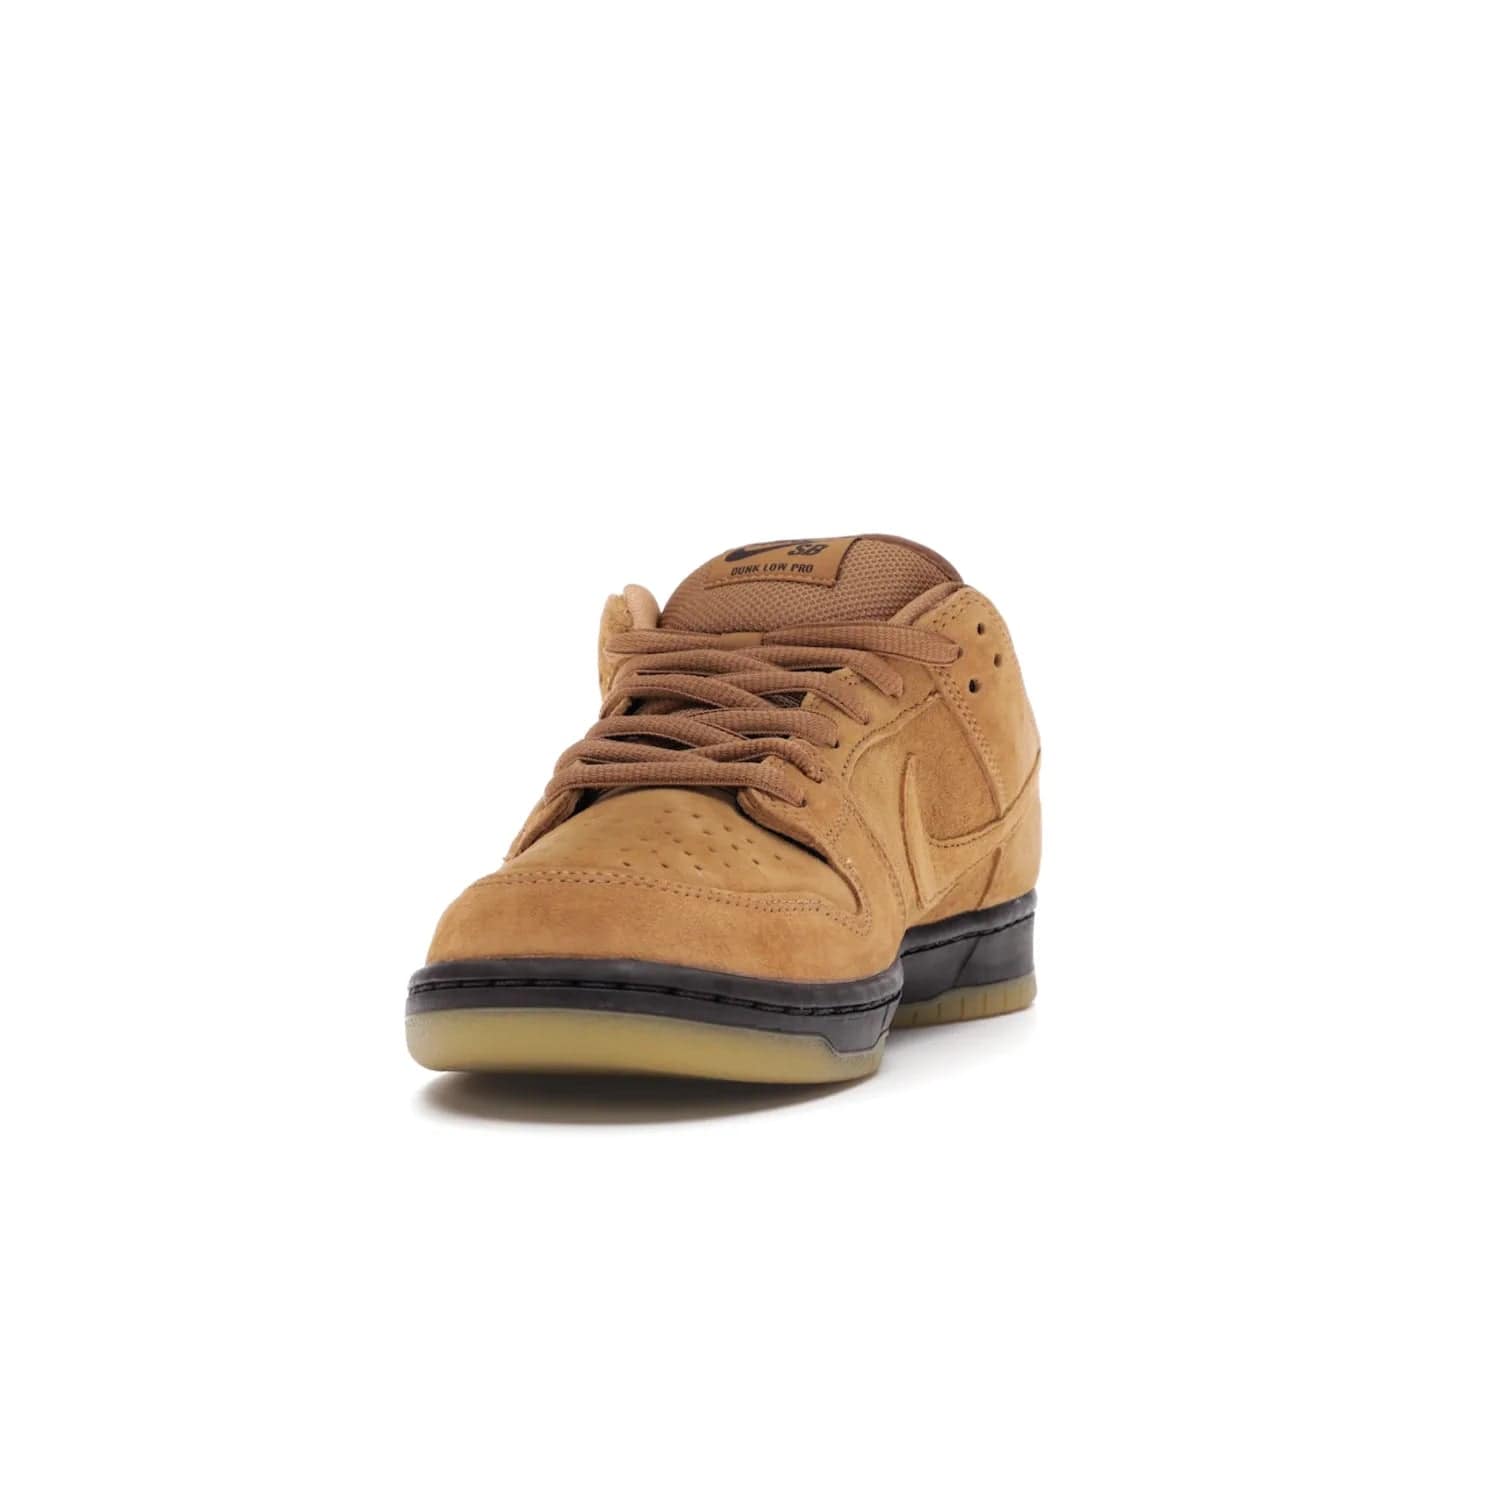 Nike SB Dunk Low Wheat (2021/2023) - Image 12 - Only at www.BallersClubKickz.com - The Nike SB Dunk Low Wheat (2021/2023)has a sleek silhouette and wheat suede upper. Tan tones for lining, mesh tongues, and laces. Iconic color palette midsole, perforated boxing toe. Brown branding on tongue and heel. Gum rubber outsole with partitioned pattern for traction. Eschewed in Feb 2021 for $110.